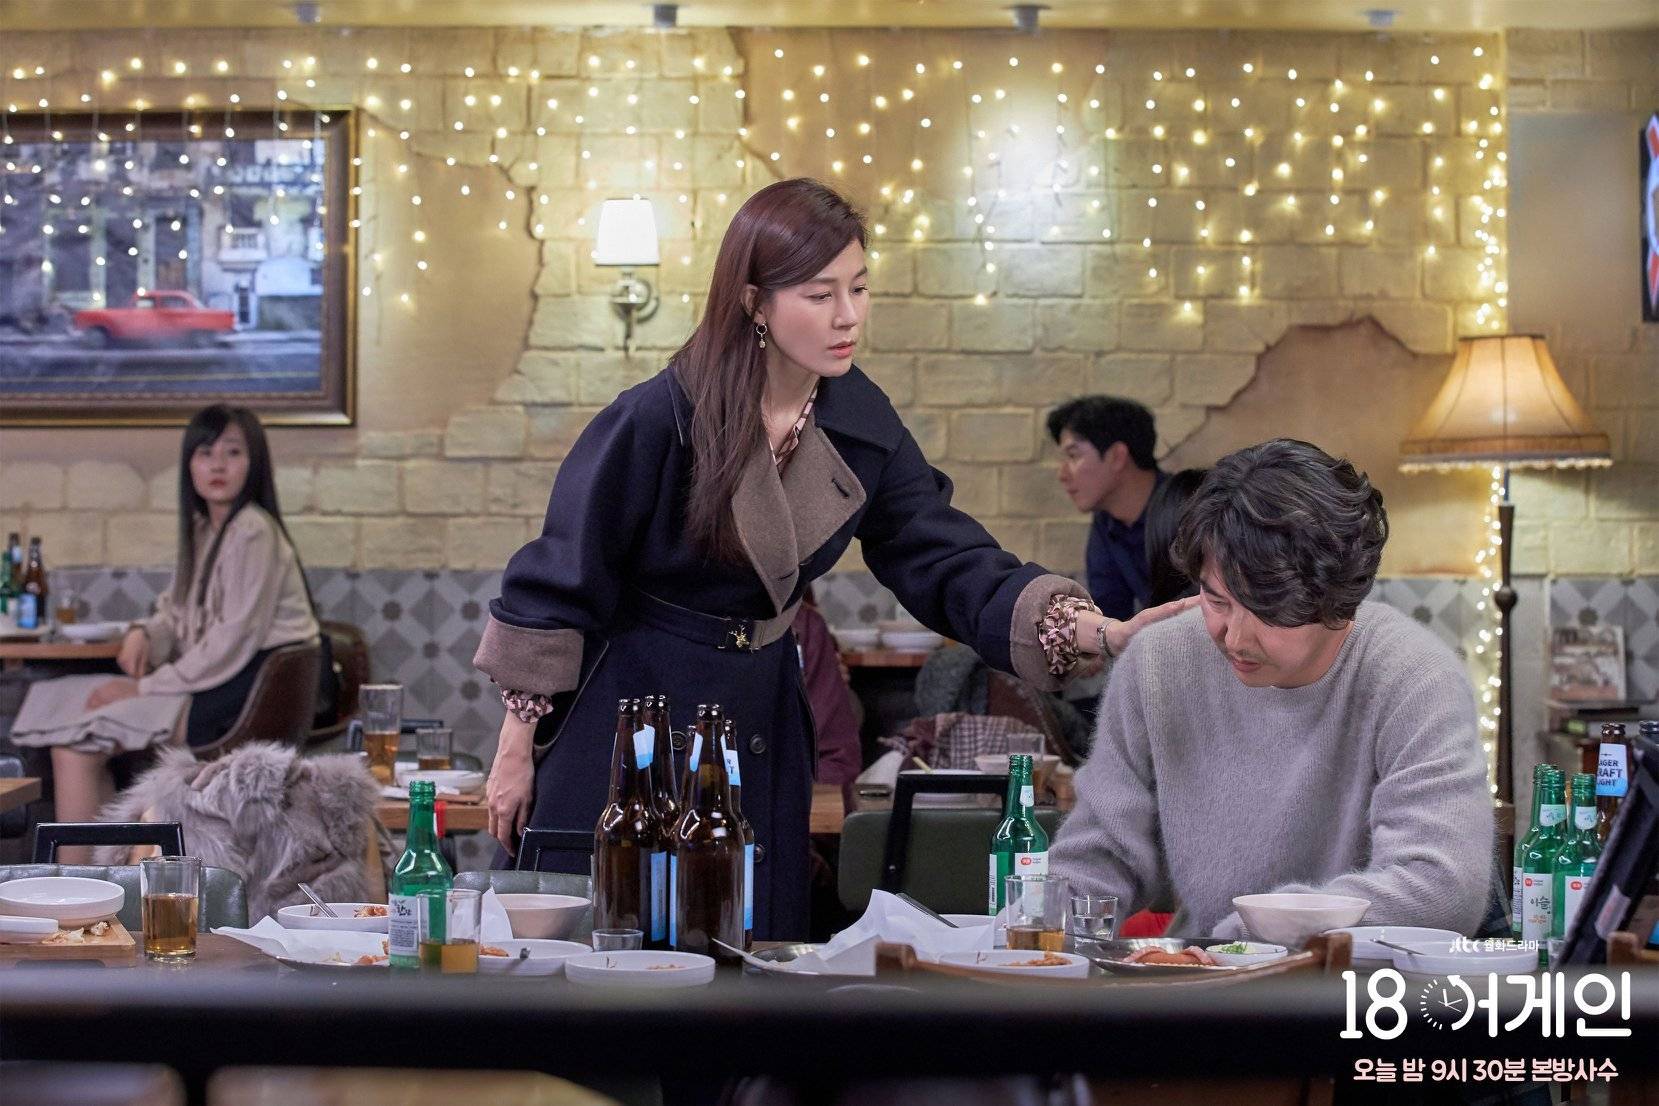 [photos] New Stills And Behind The Scenes Images Added For The Korean Drama 18 Again